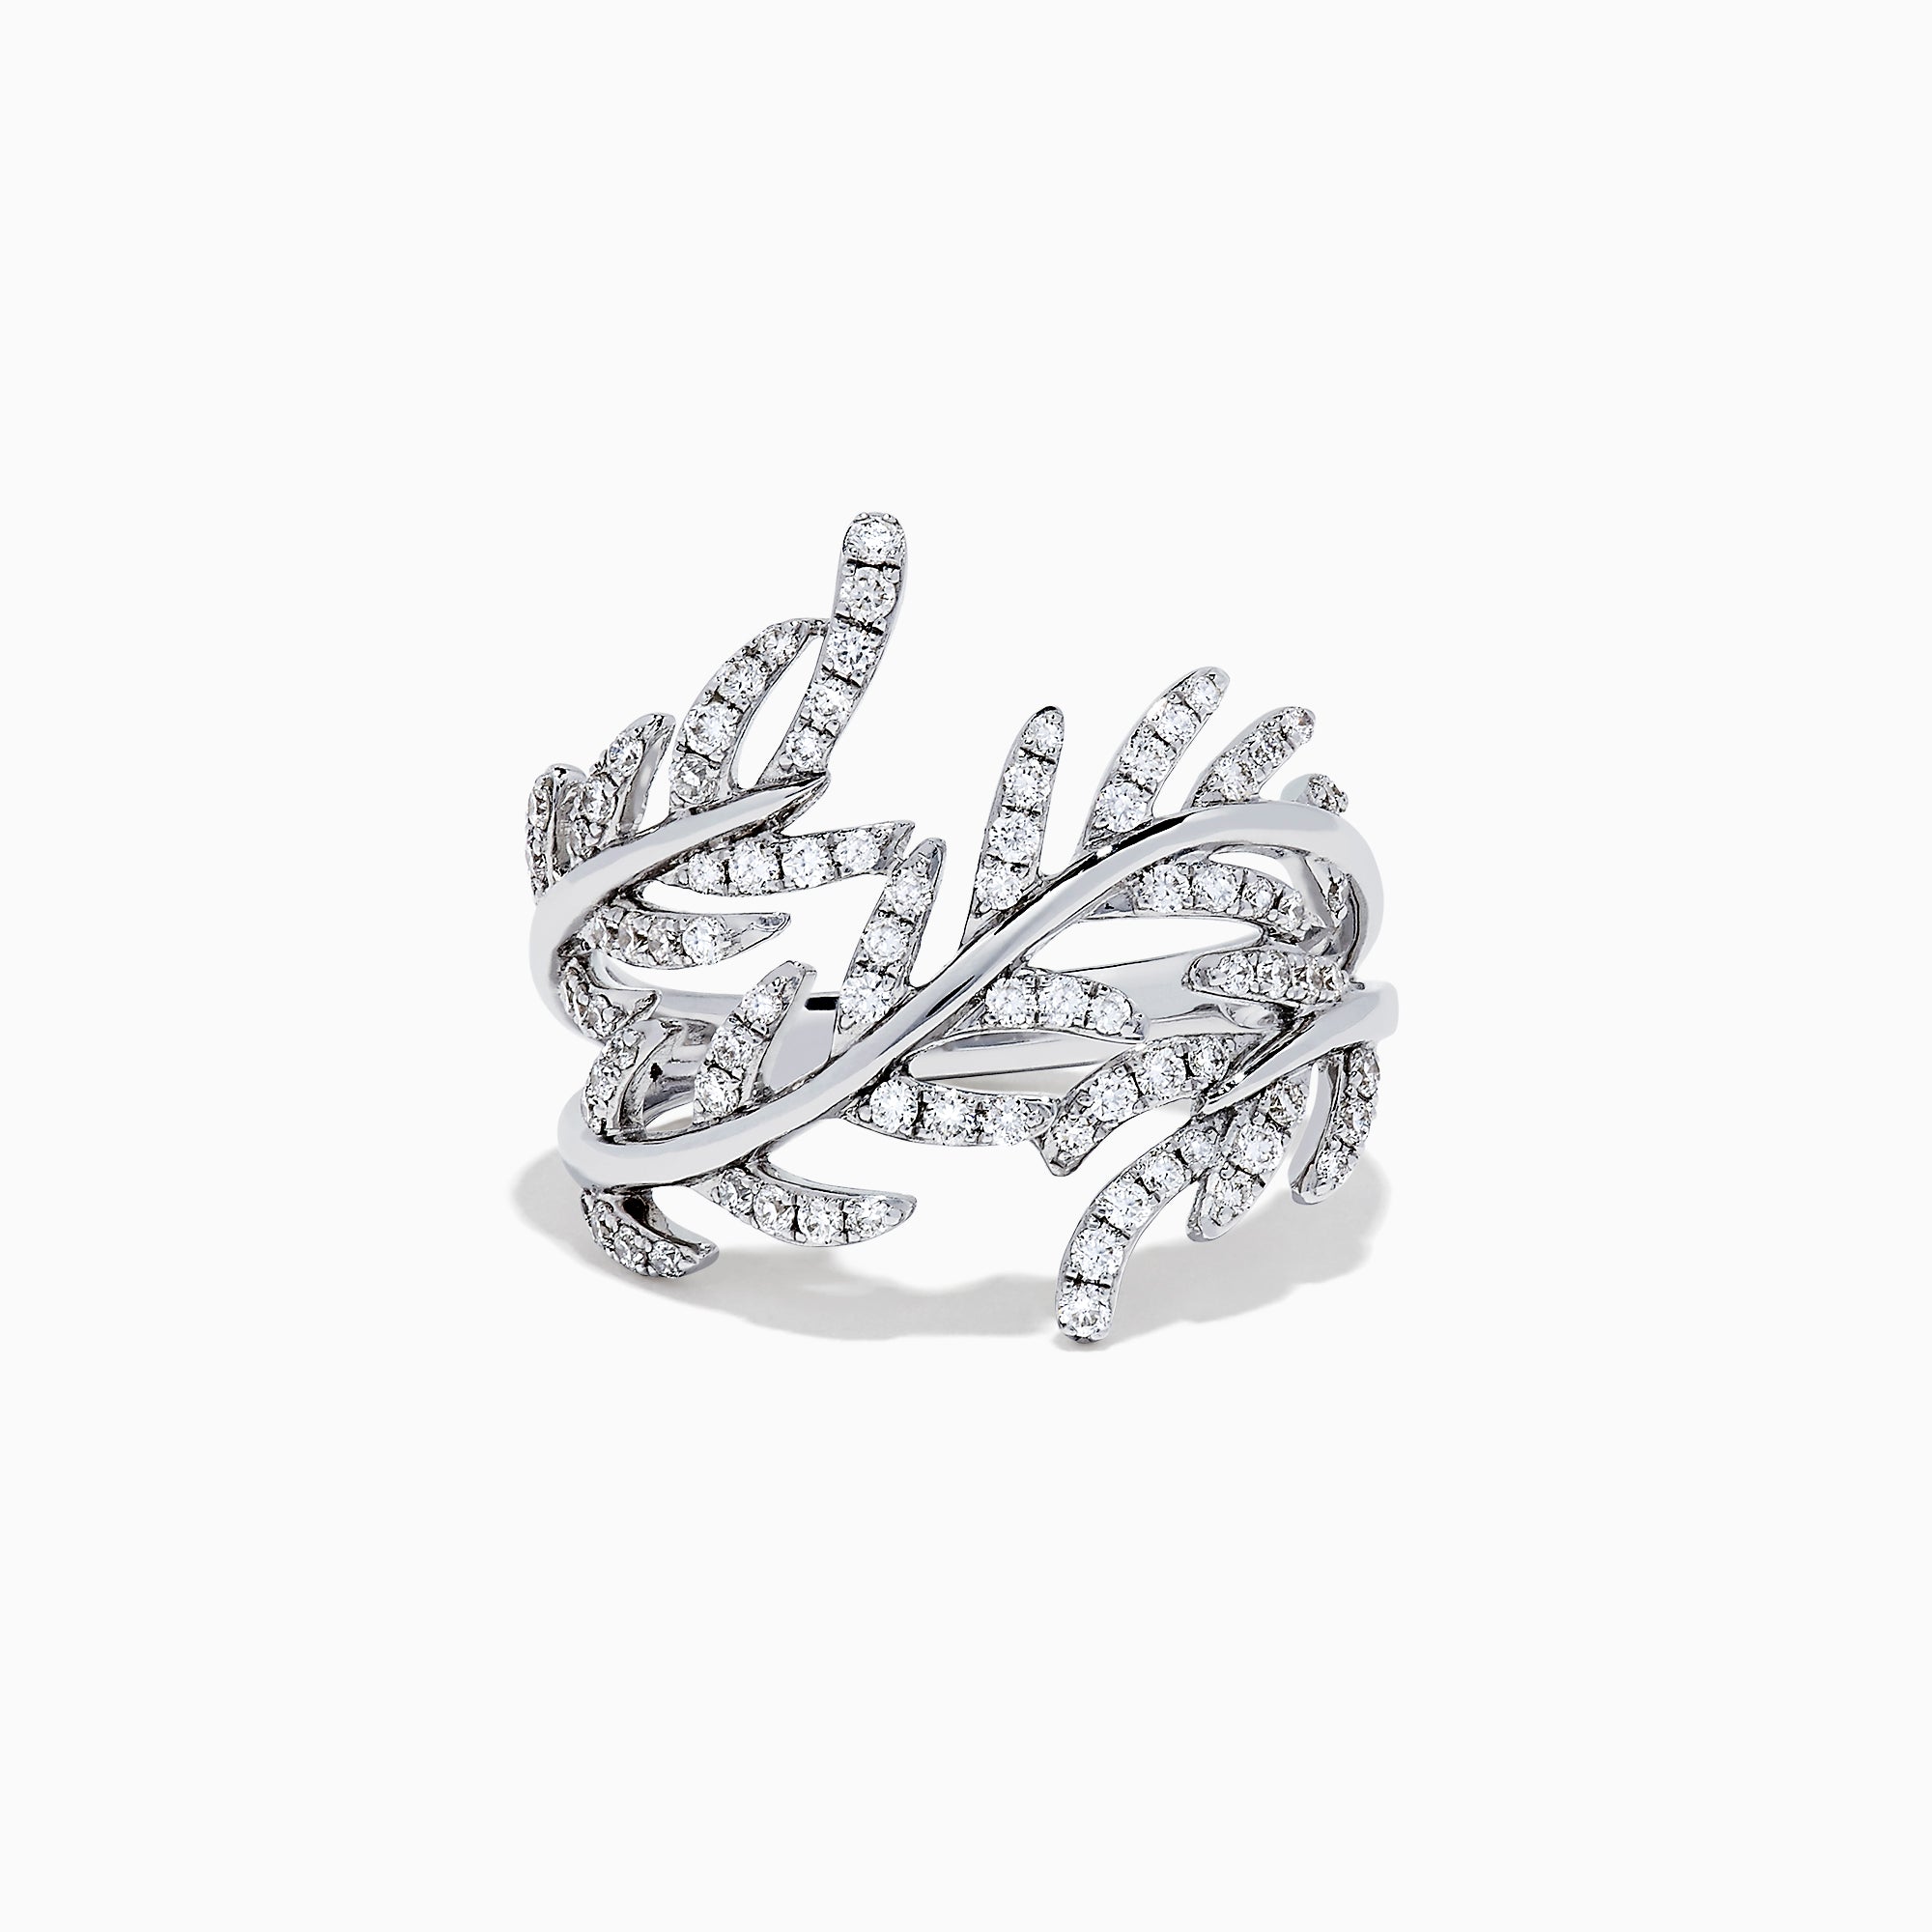 Effy Pave Classica 14K White Gold Diamond Wrapped Leaf Ring, 0.62 TCW